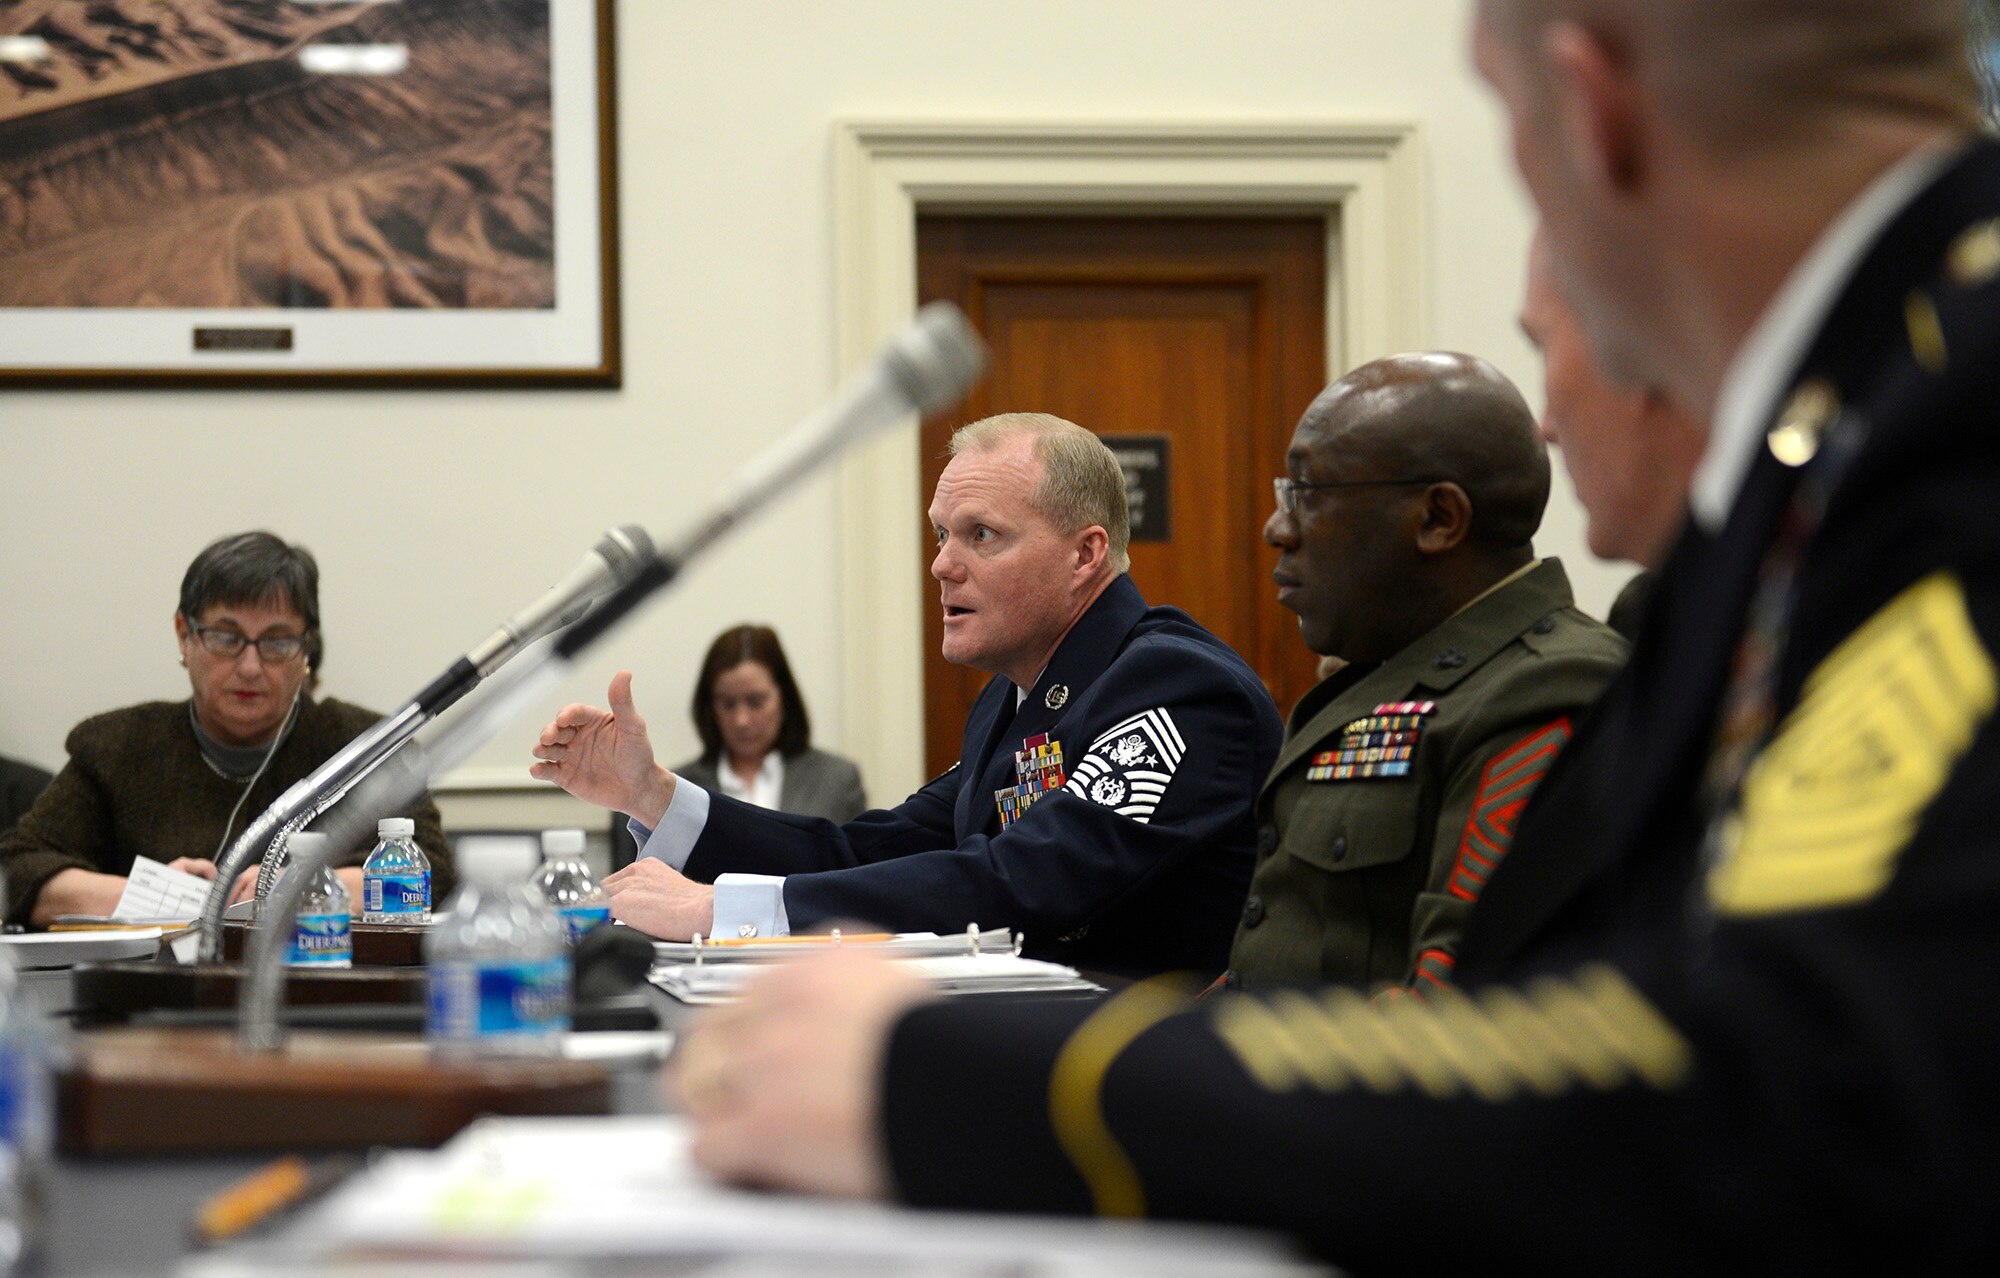 Chief Master Sgt. of the Air Force James A. Cody testifies before the House's Committee on Appropriations Subcommittee on Military Construction and Veterans Affairs Feb. 25, 2015, in Washington, D.C. As part of his testimony, Cody spoke about the challenge of last year's force reductions and the impact of fiscal uncertainty on the force while facing global demands and geopolitical realities. In addition to Cody, the other witnesses were Sgt. Maj. of the Army Daniel A. Dailey, Master Chief Petty Office of the Navy Michael D. Stephens, and Sgt. Maj. of the Marine Corps Ronald Green. (U.S. Air Force photo/Scott M. Ash)